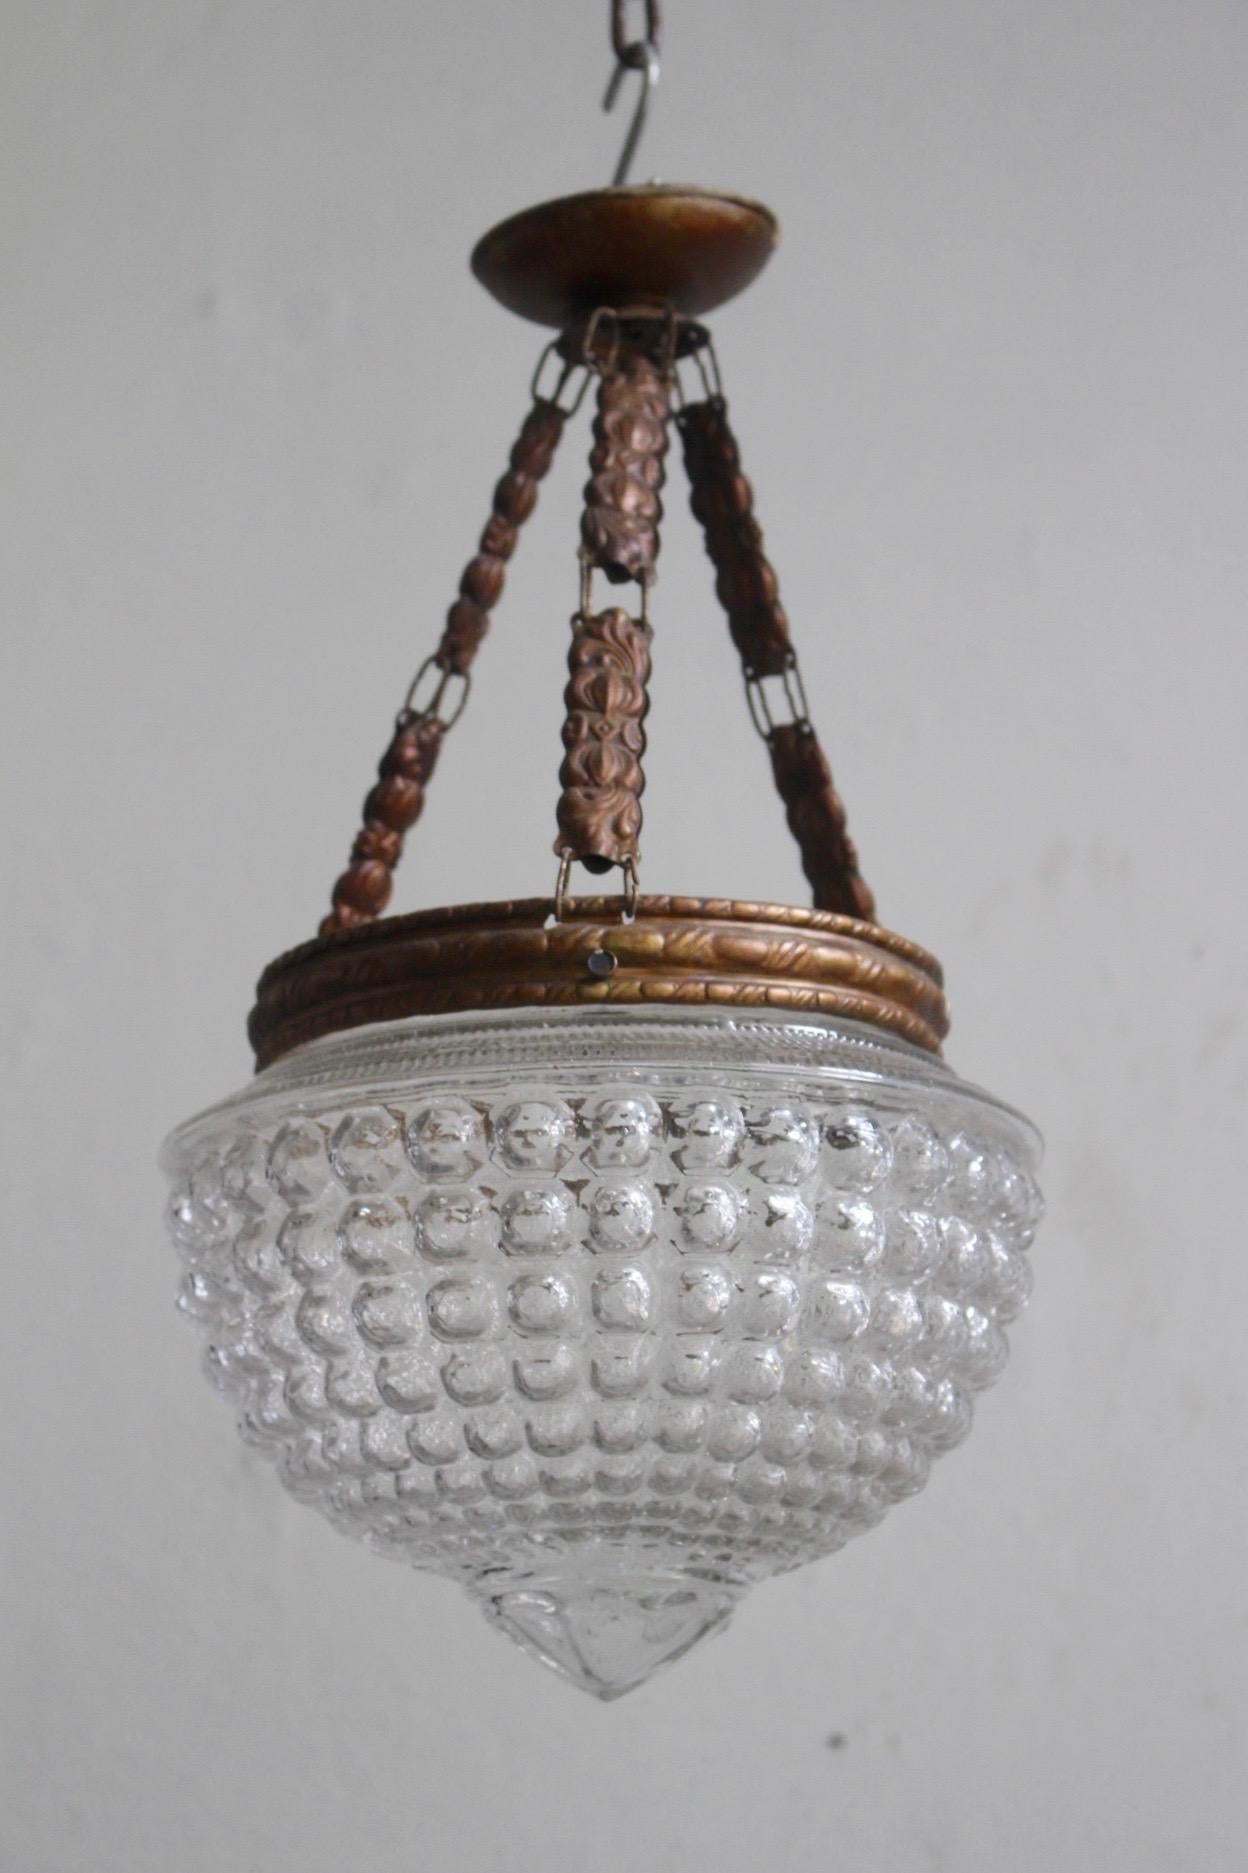 Late 19th antique Art Nouveau pendant lamp with geometric bubble glass and original chains with beautiful light copper color patina in good antique condition.